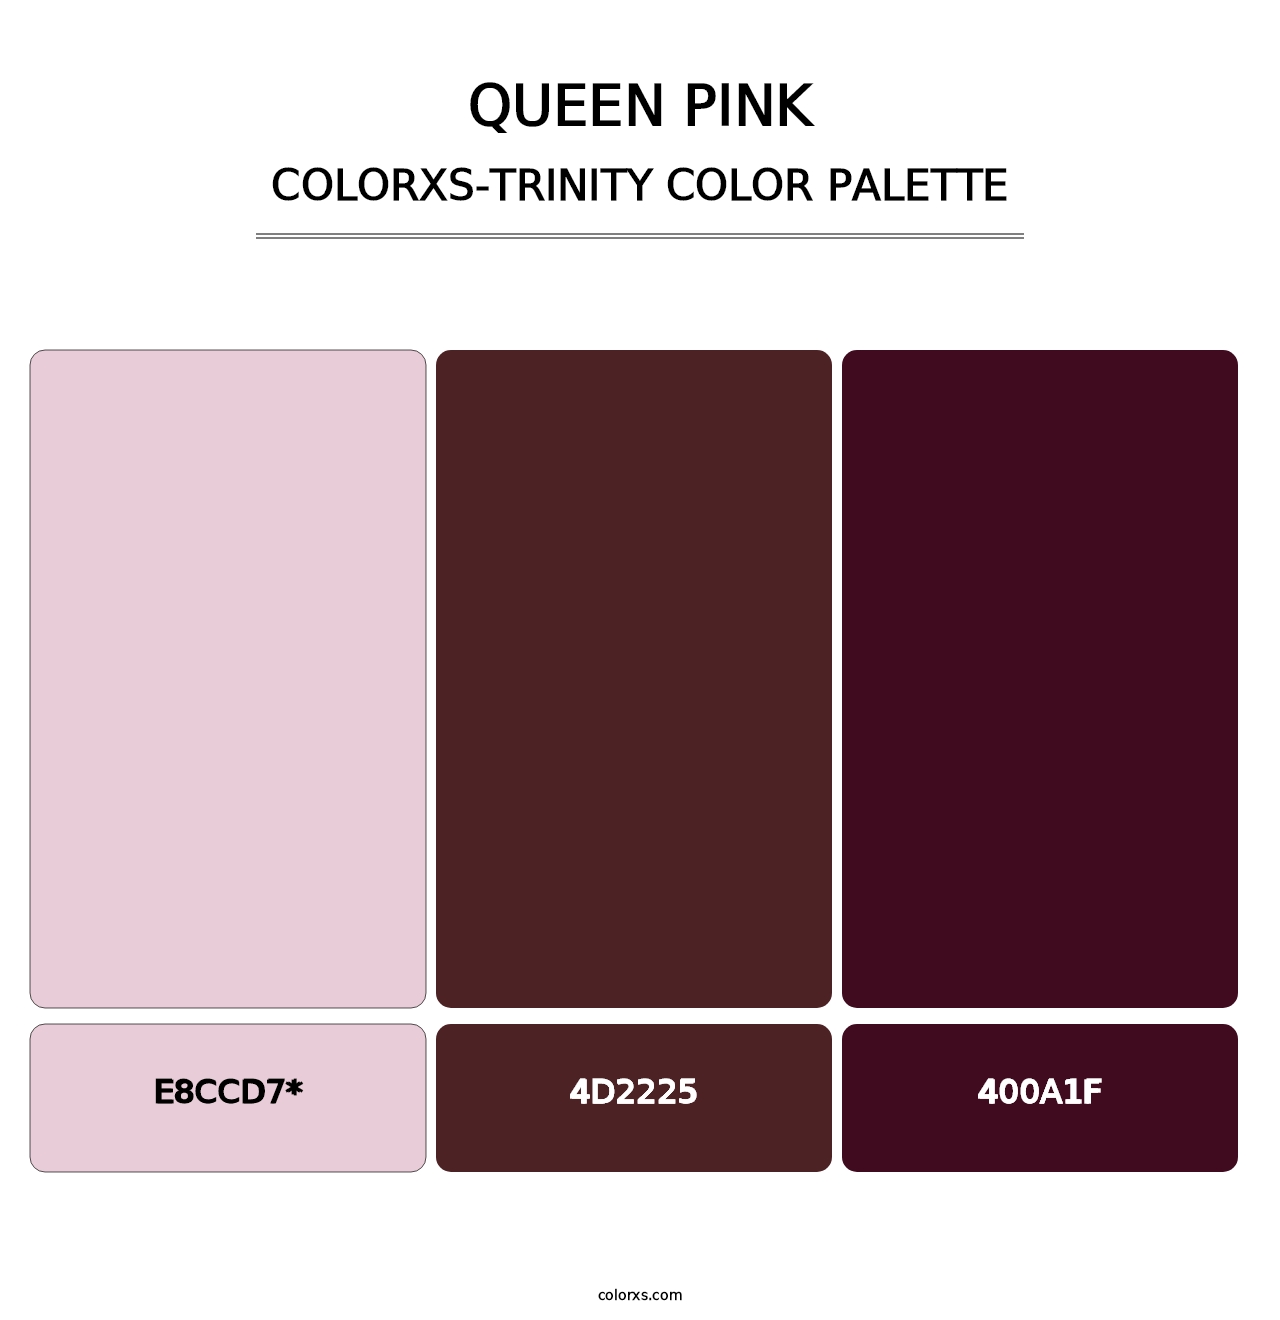 Queen Pink - Colorxs Trinity Palette